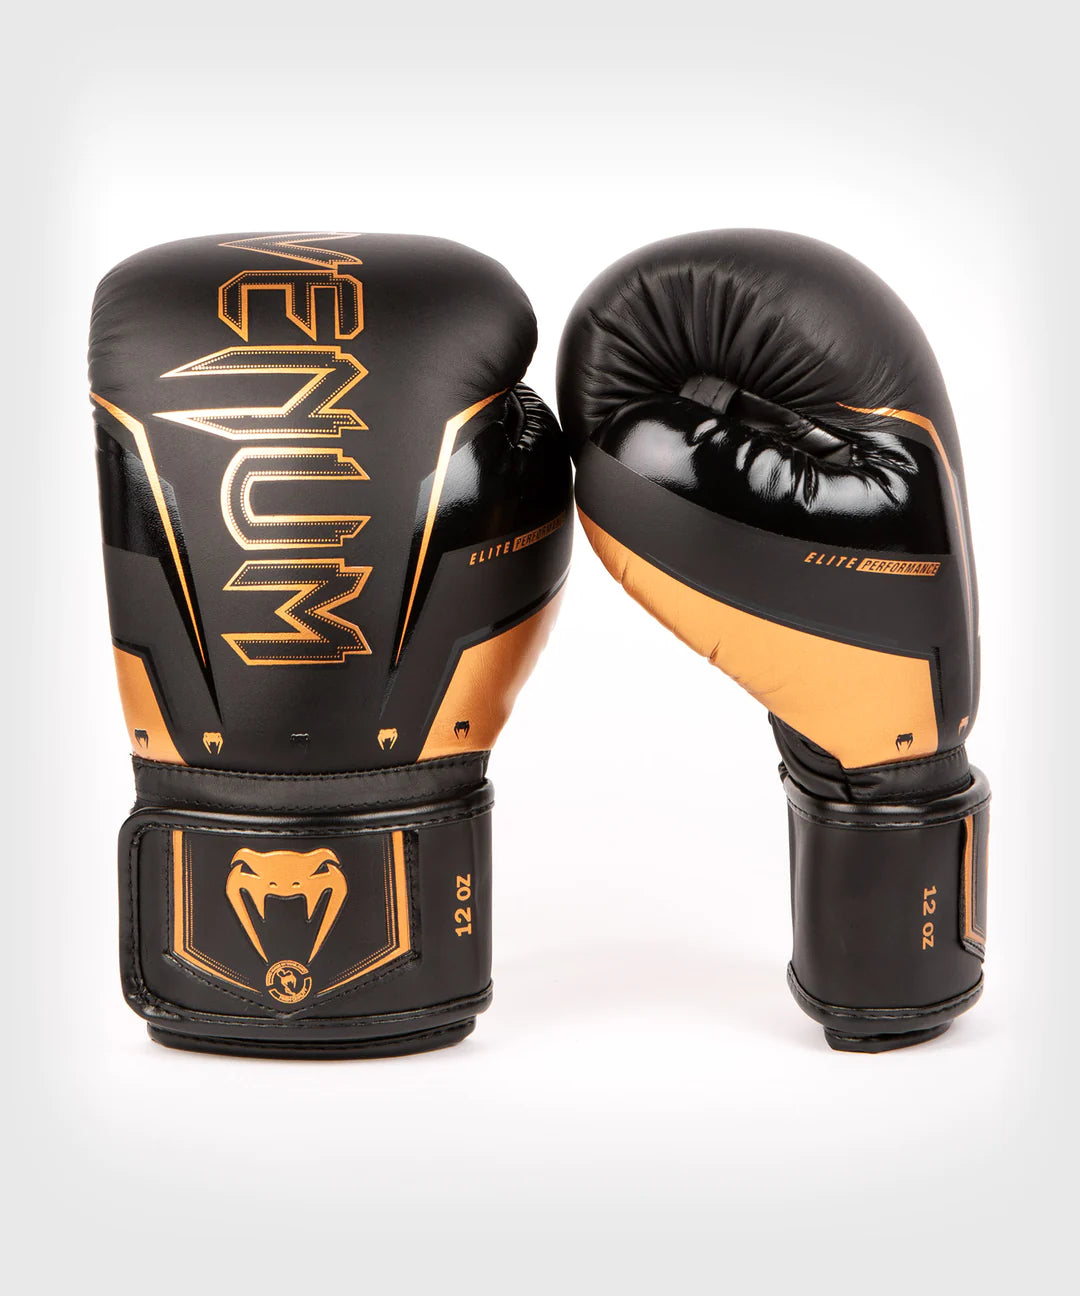 Elite Evo 2.0 Boxing Gloves for combat sports with synthetic leather and shock absorption. Back and Side View